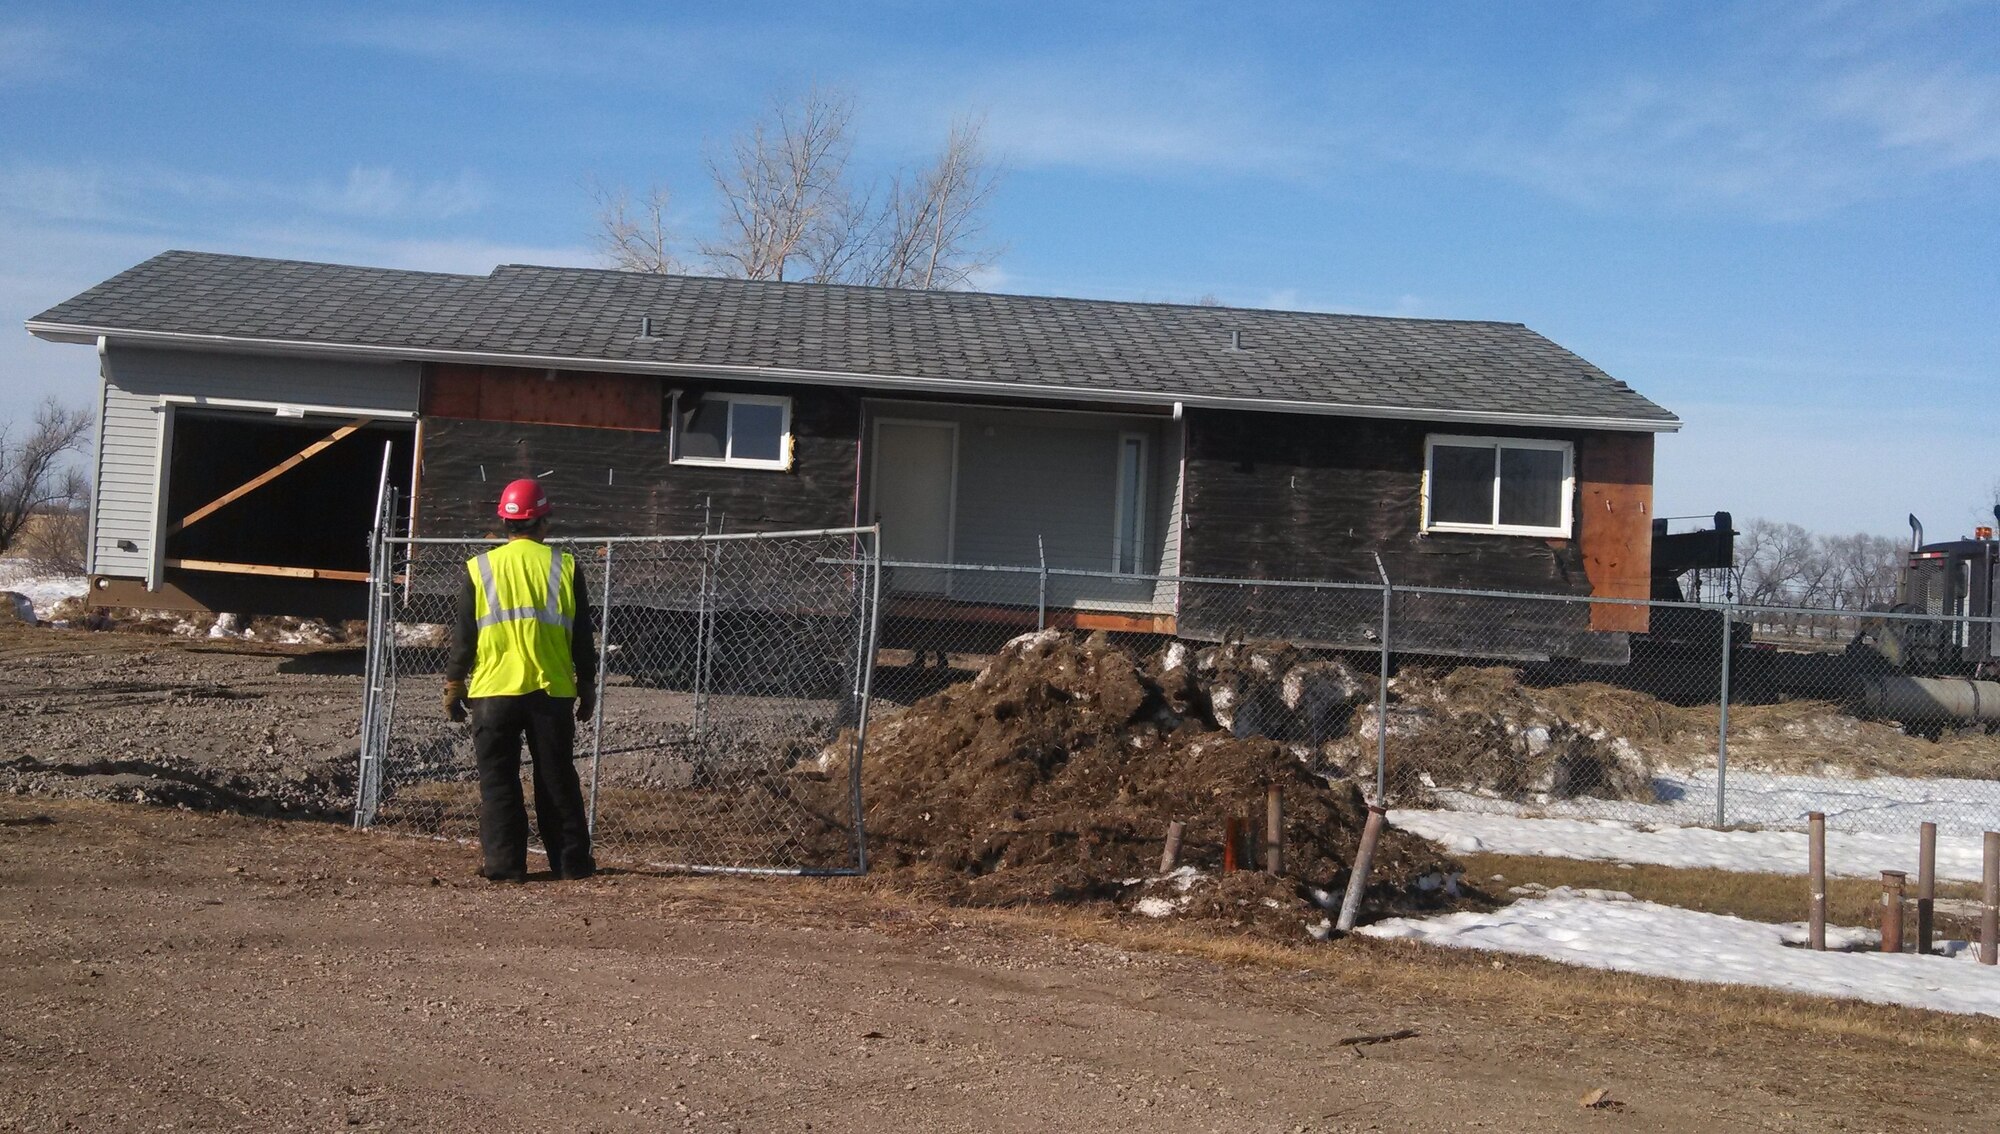 A crew member watches as the first of 31 homes donated this year to Operation Walking Shield is hauled away from Grand Forks Air Force Base, N.D., in the spring of 2014. Operation Walking Shield’s Program Manager, Marvin Thurman, credits the combined efforts of Walking Shield, Balfour Beatty Communities and the Air Force for successfully relocating the homes to the nearby Turtle Mountain Reservation. The homes, which had been marked for demolition, will help fill a stark shortage of housing at the reservation.  (Air Force Photo/Cassandra Spradlin)